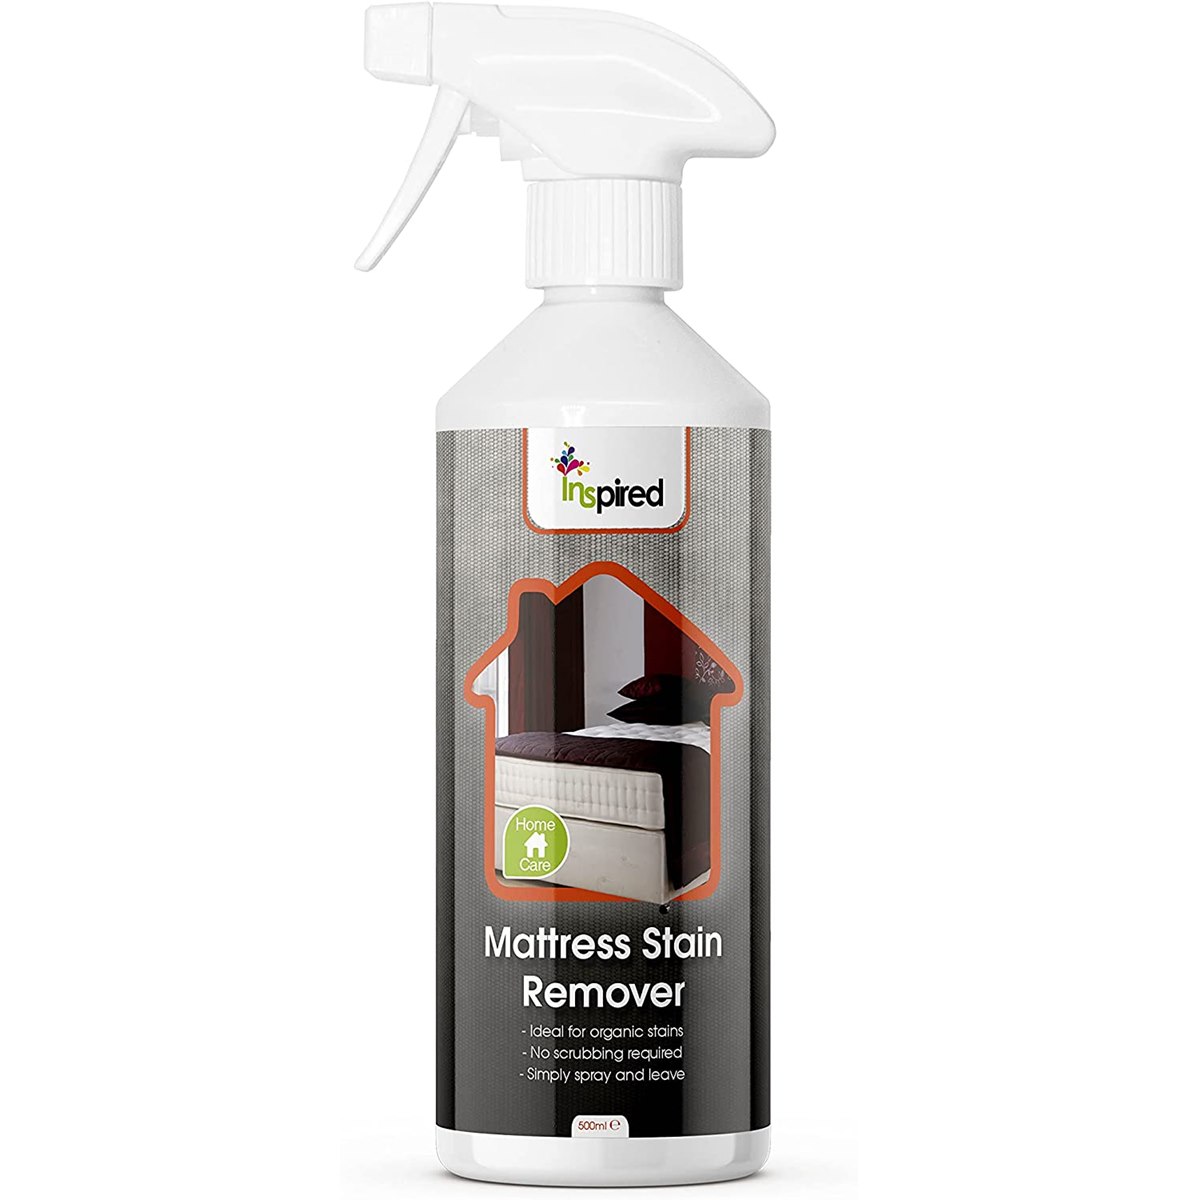 Mattress Stain Remover Spray Homecare Essentials 500ml Removes Organic  Stains